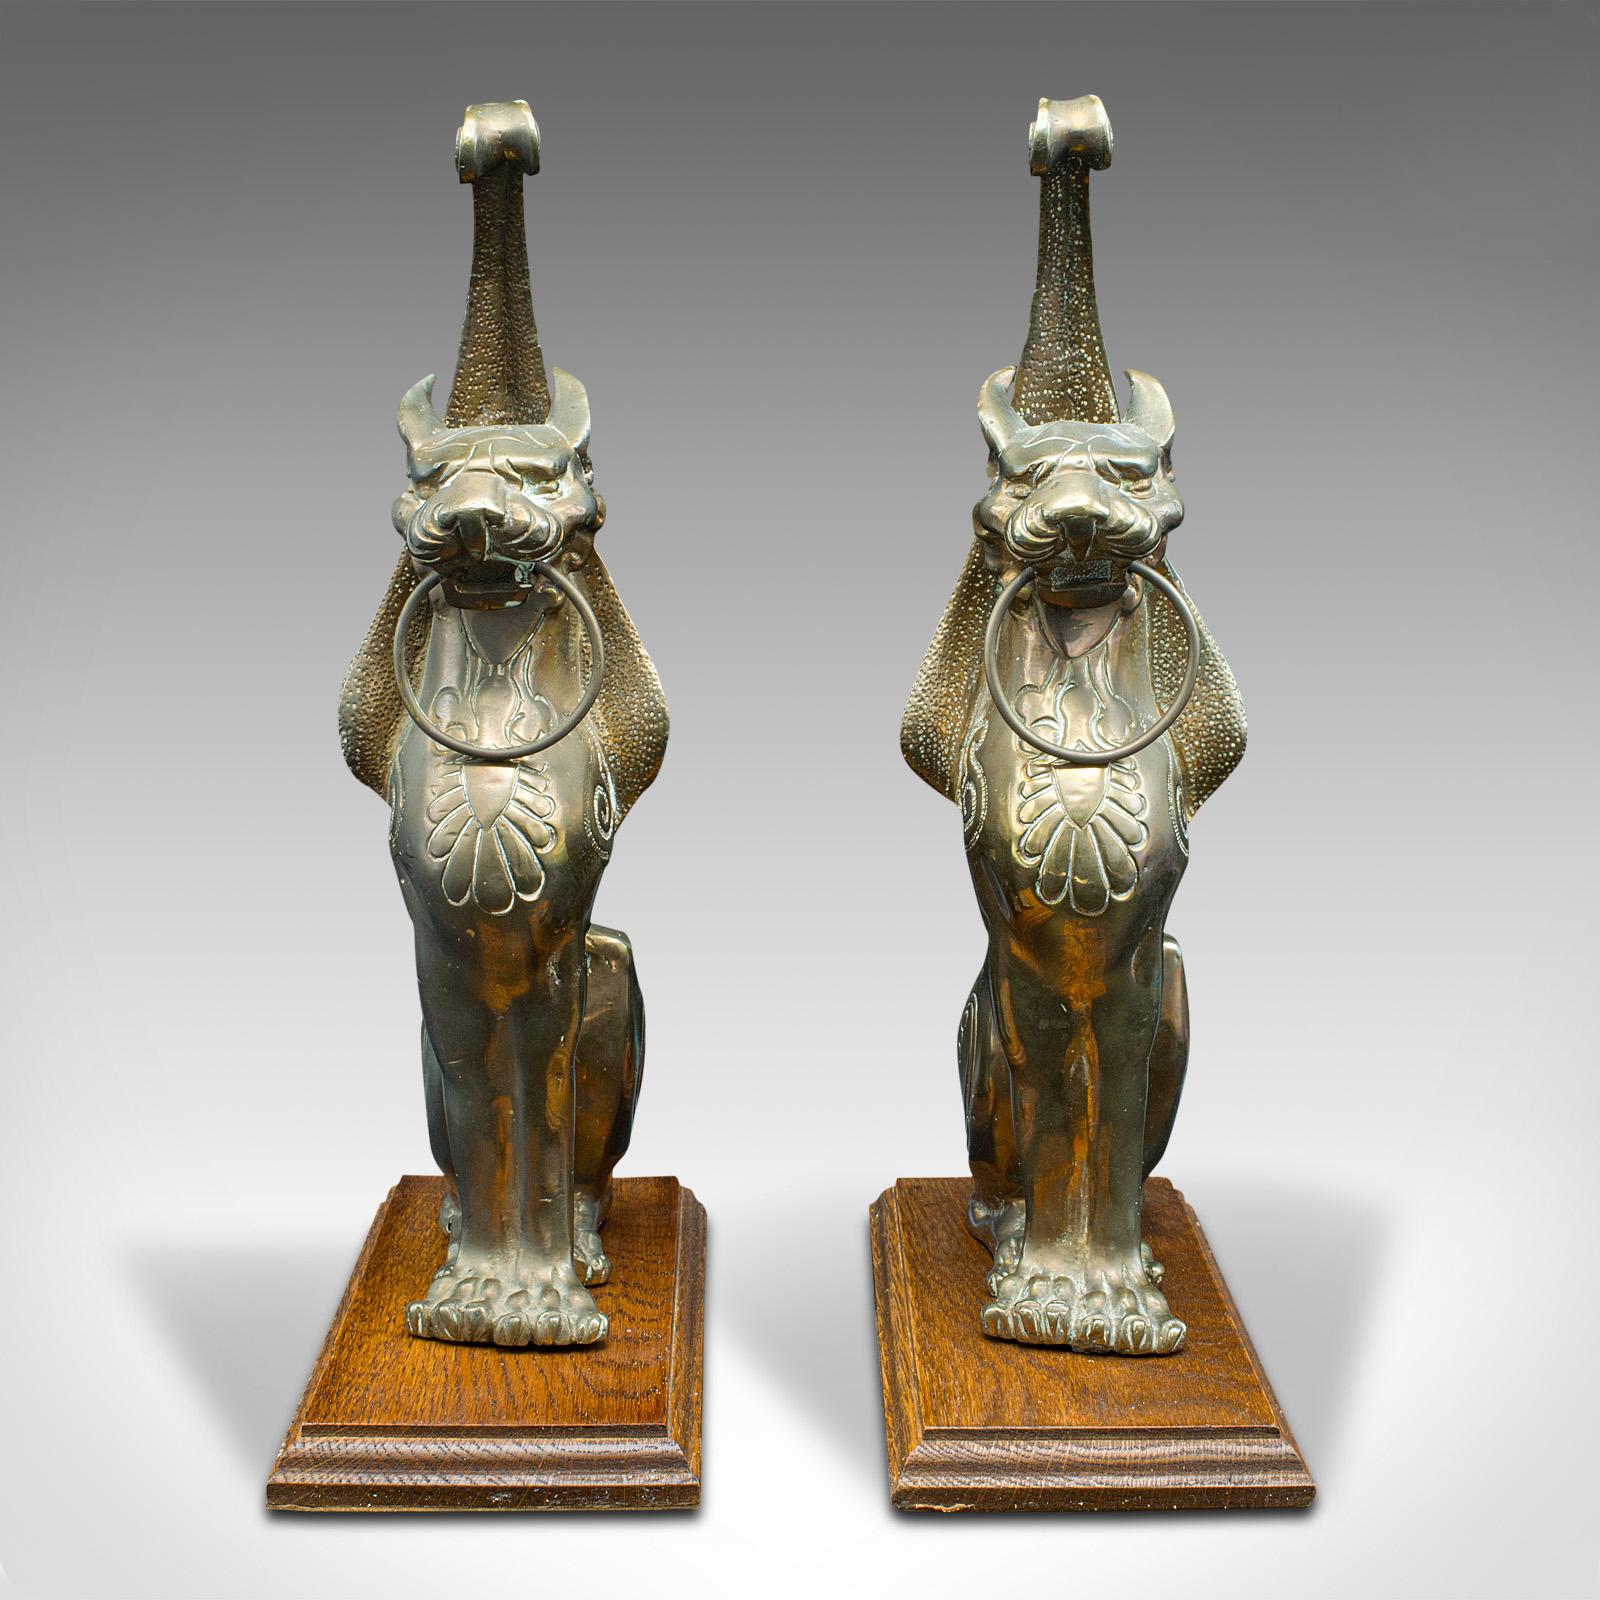 This is a pair of antique winged cat statues. An Italian, bronze on oak decorative figure in the Grand Tour taste, dating to the early Victorian period, circa 1850.

Striking cat ornaments with mythological wings
Displaying a desirable aged patina